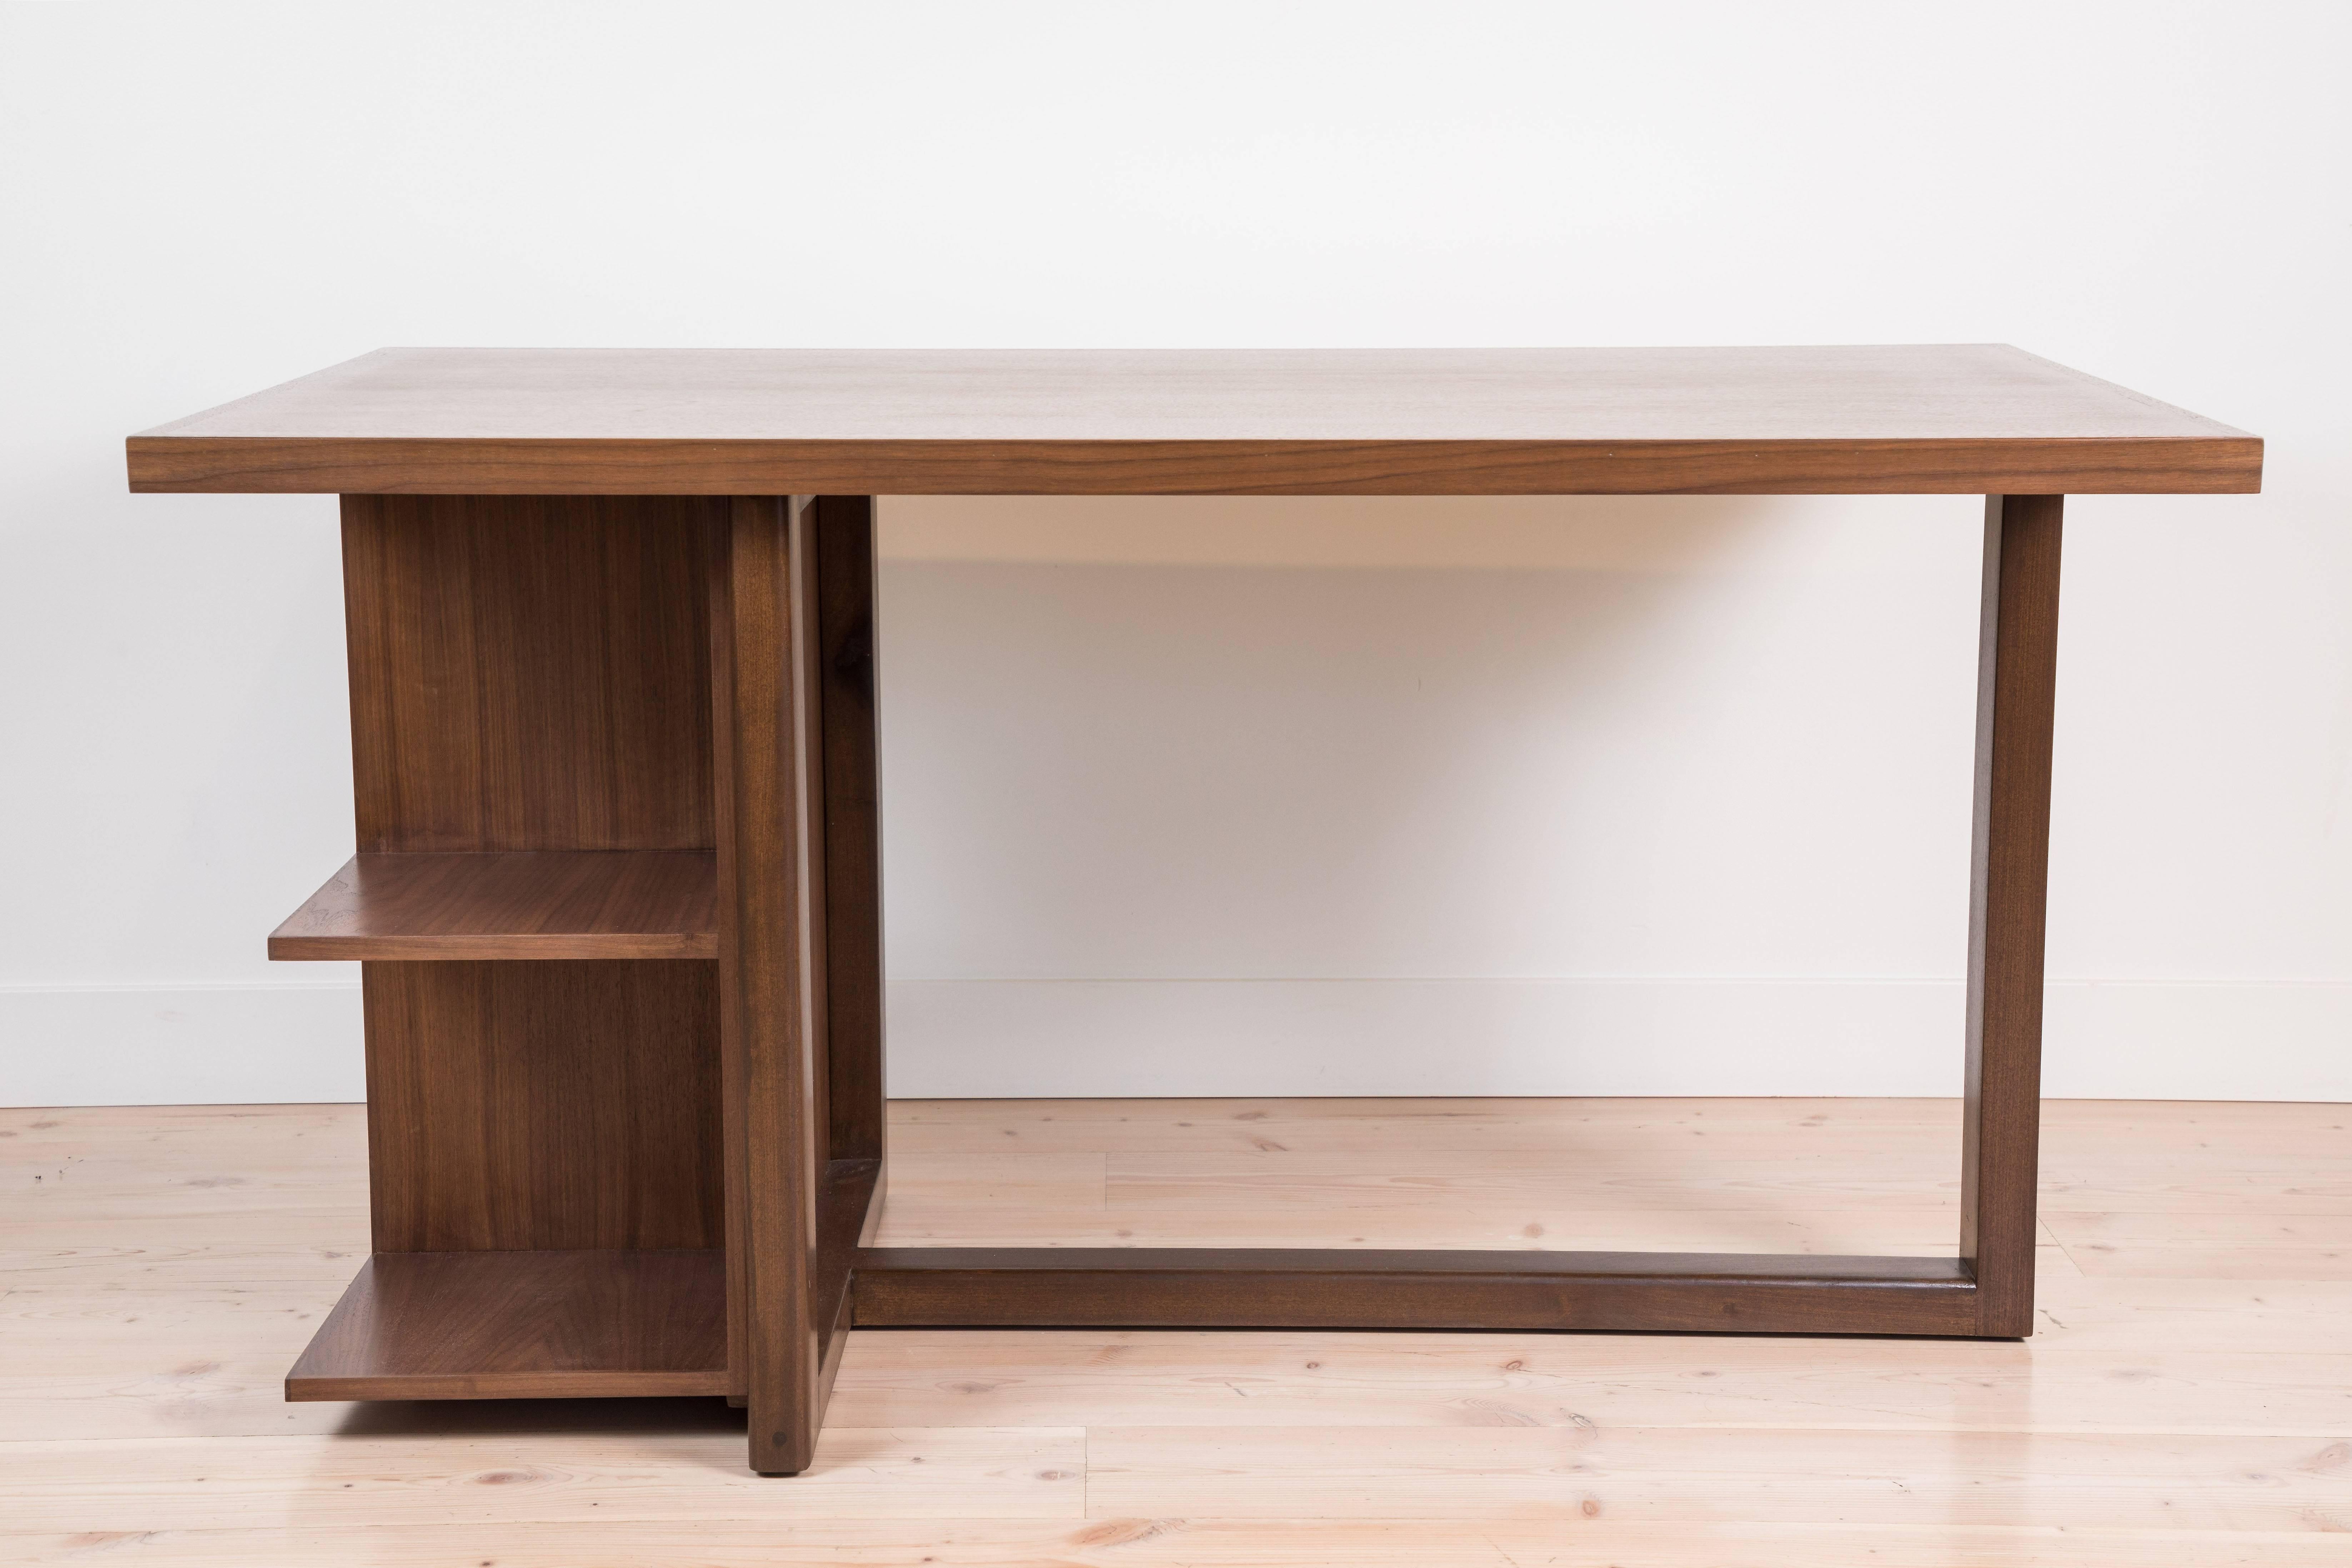 Ivanhoe desk by Lawson-Fenning

Available to order in various finishes with a 10-12 week lead time.